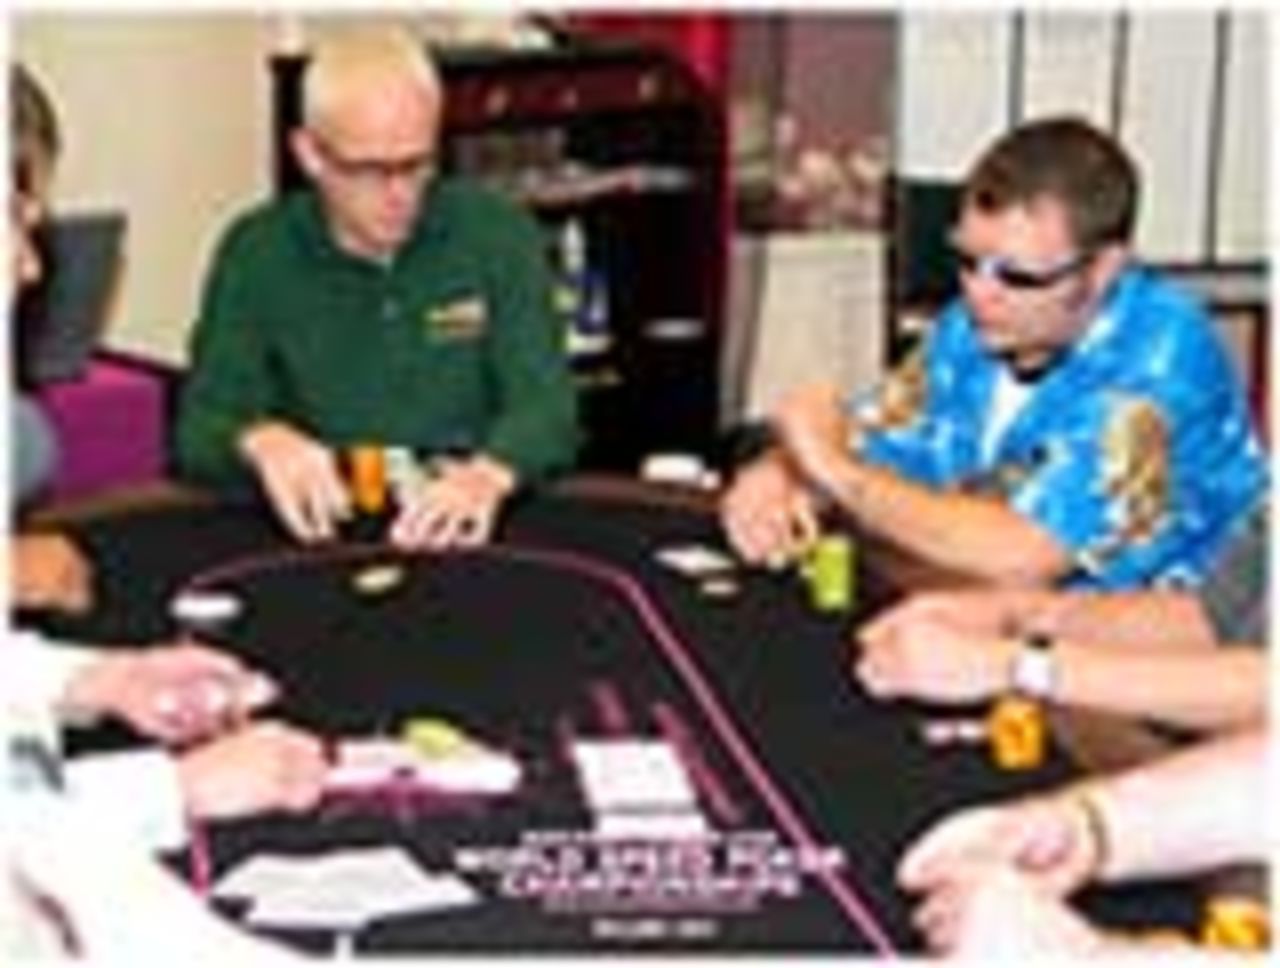 Dave Colclough at the World Speed Poker Championships